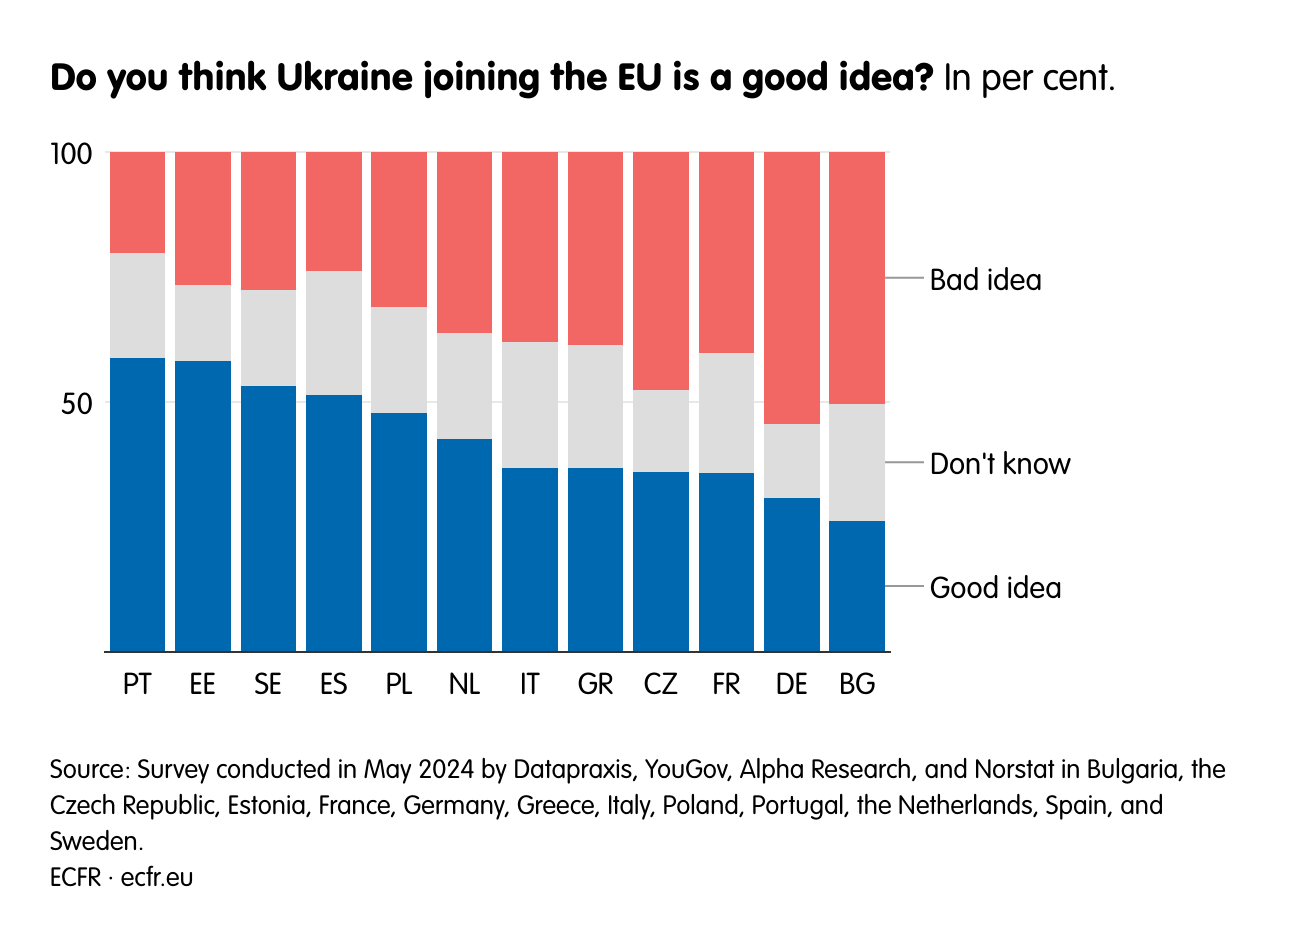 Do you think Ukraine joining the EU is a good idea?